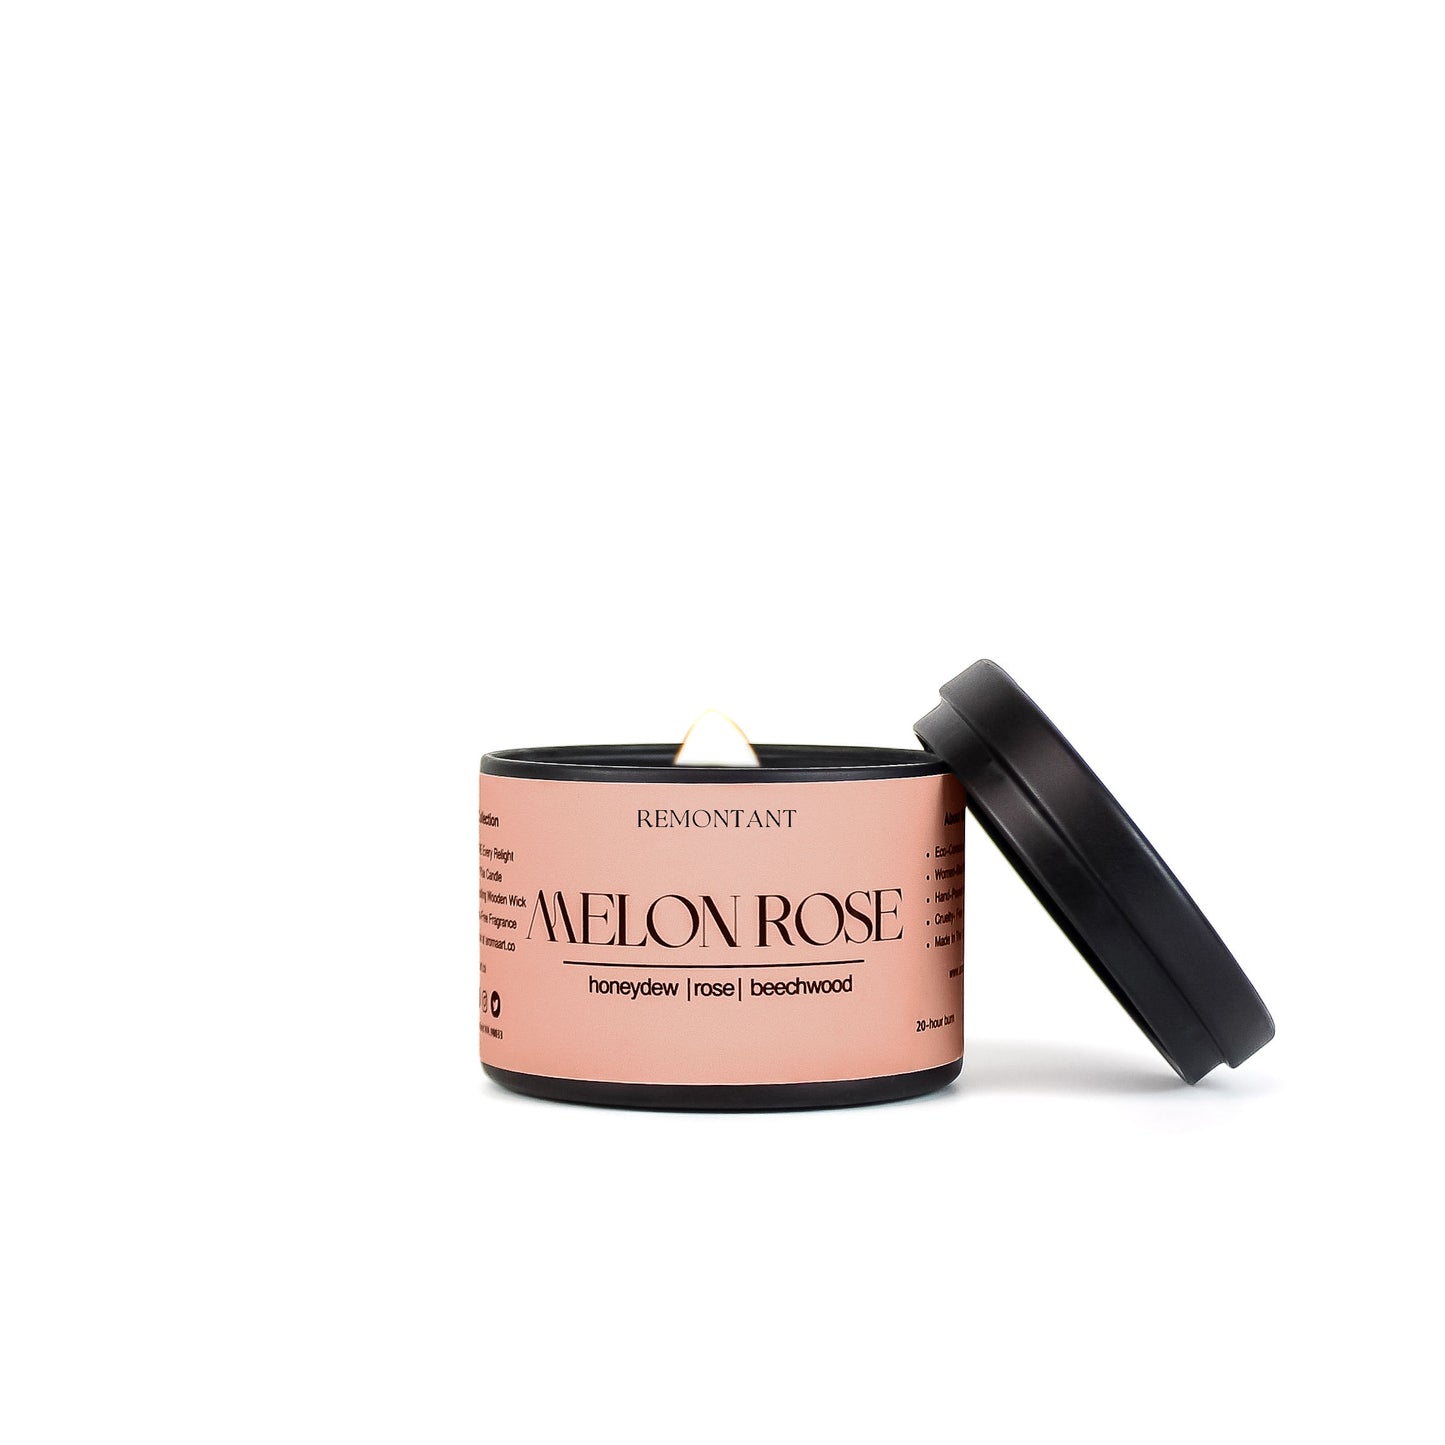 Melon Rose Travel Sized Candle Tin